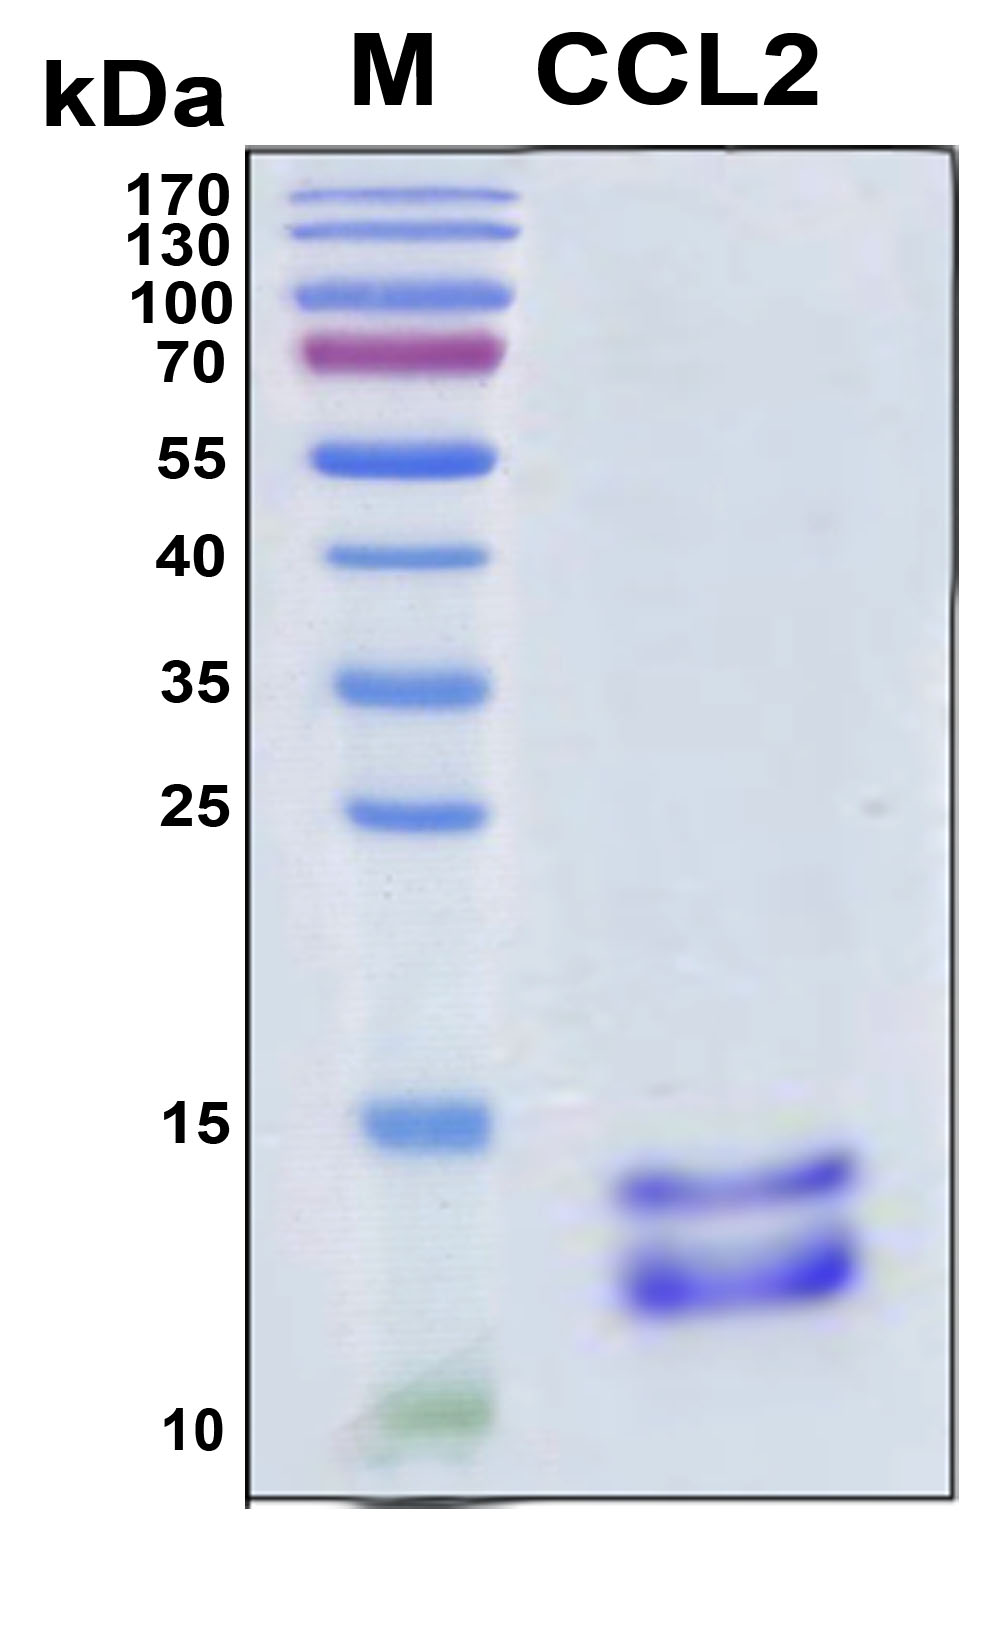 CCL2 / MCP1 Protein - SDS-PAGE under reducing conditions and visualized by Coomassie blue staining